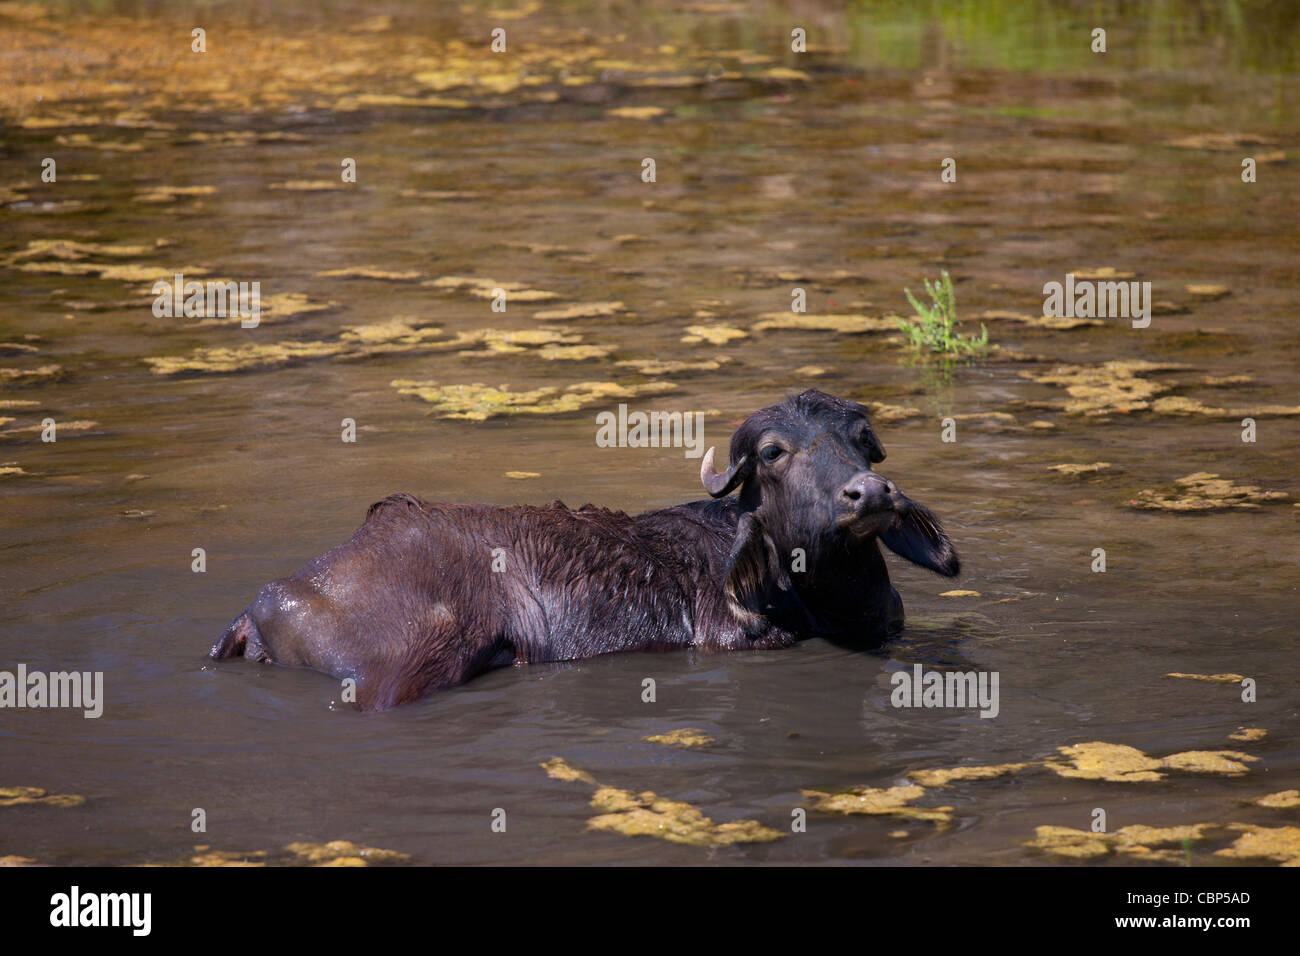 Buffalo wallowing in lake at Ranakpur in Pali District of Rajasthan, Western India Stock Photo